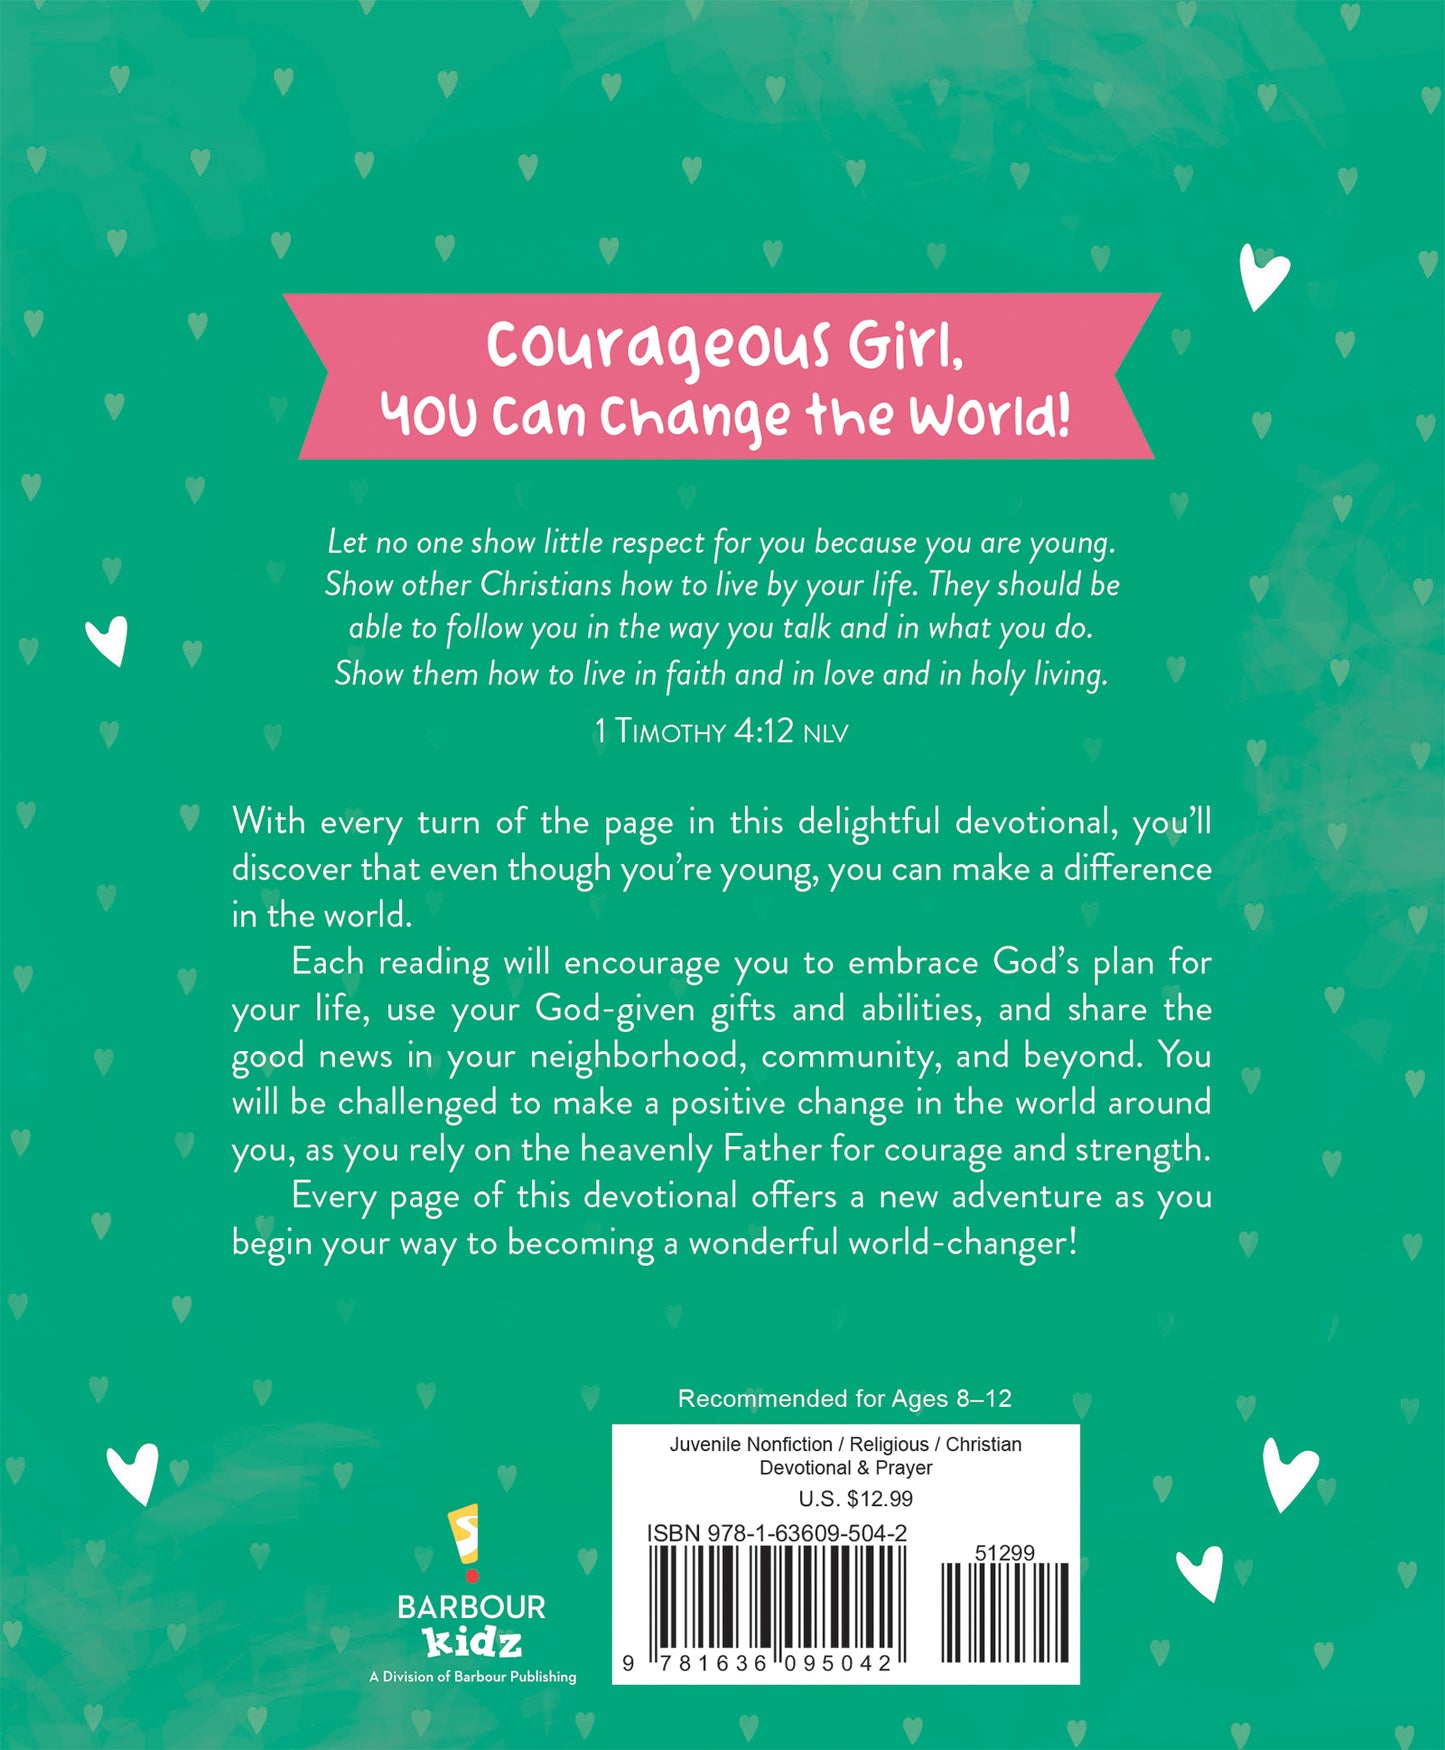 Courageous Girls Can Change the World - The Christian Gift Company